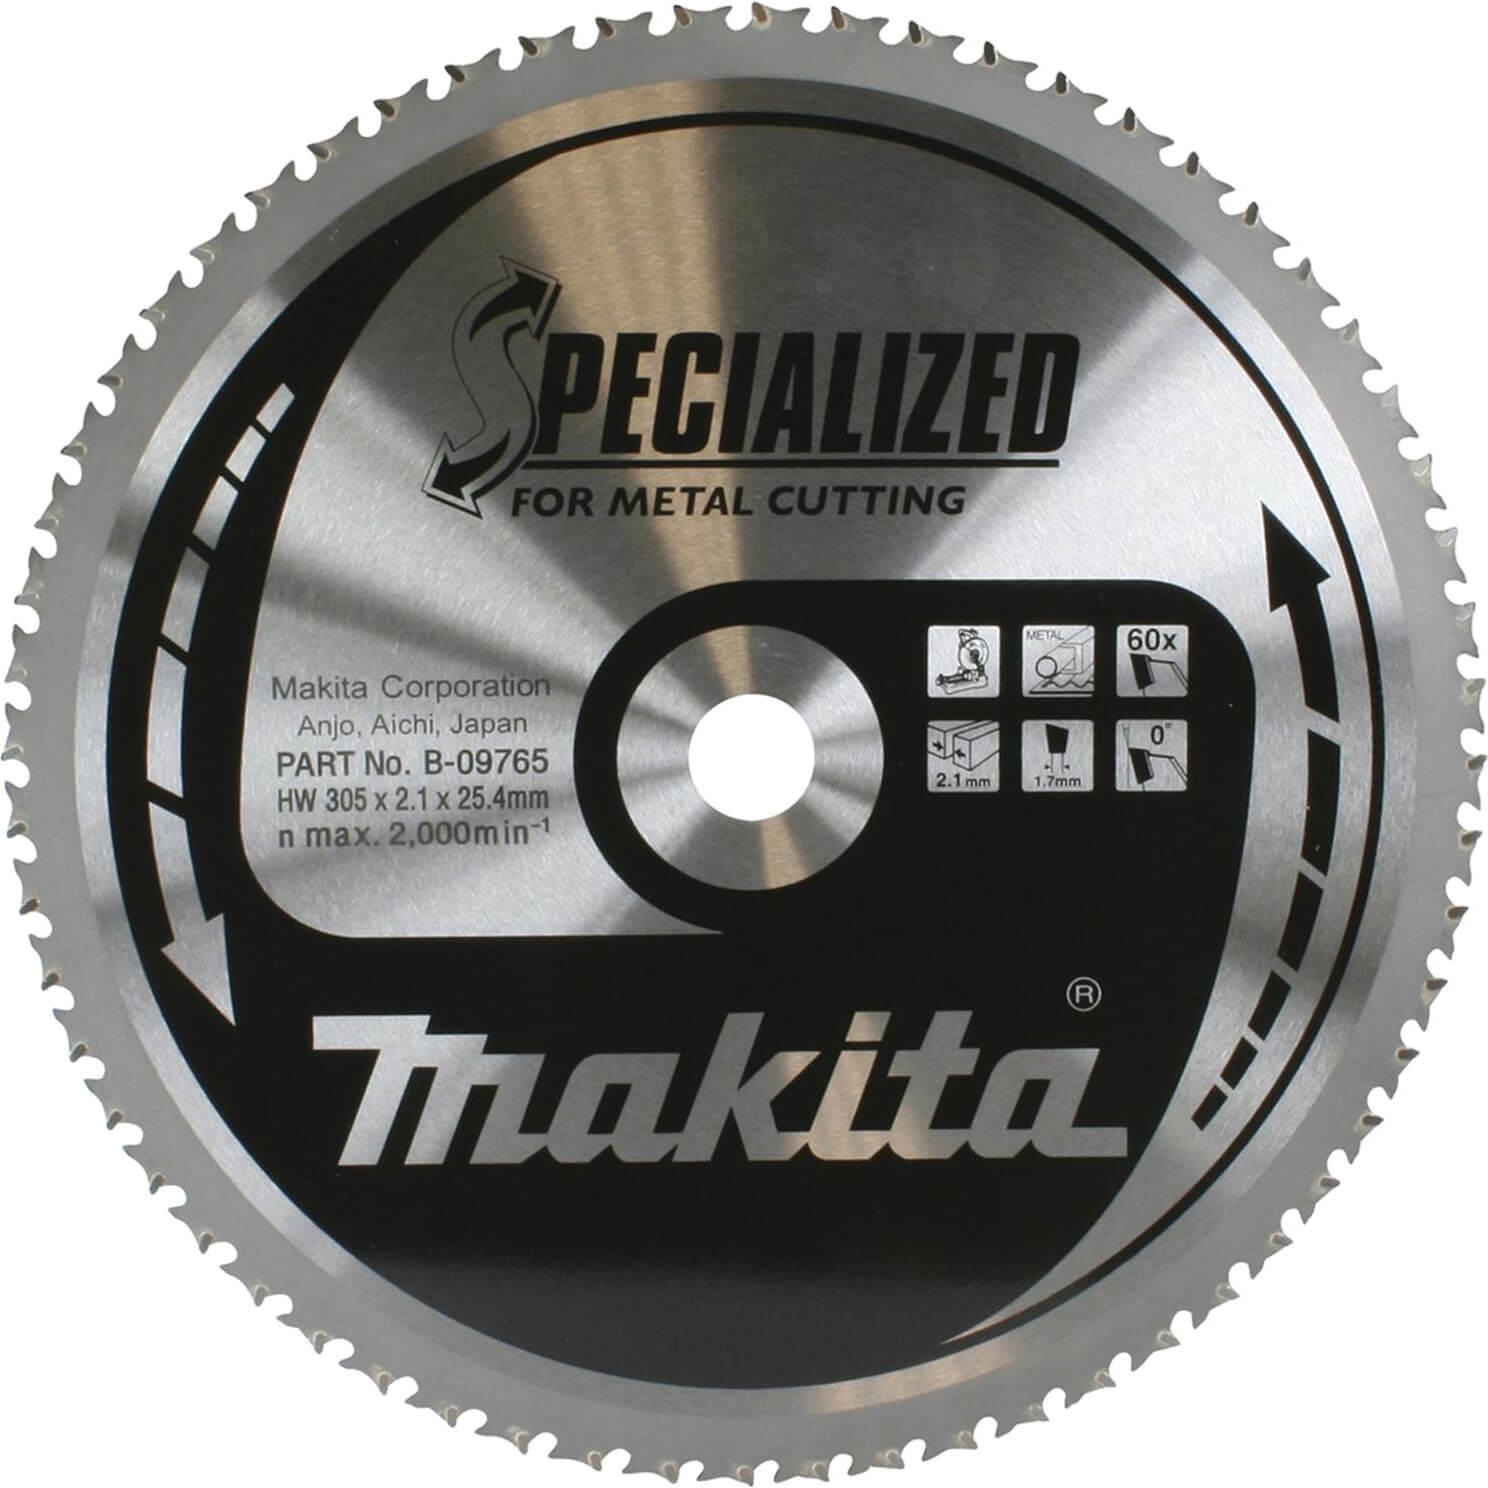 Photo of Makita Specialized Metal Cutting Saw Blade 305mm 60t 25.4mm